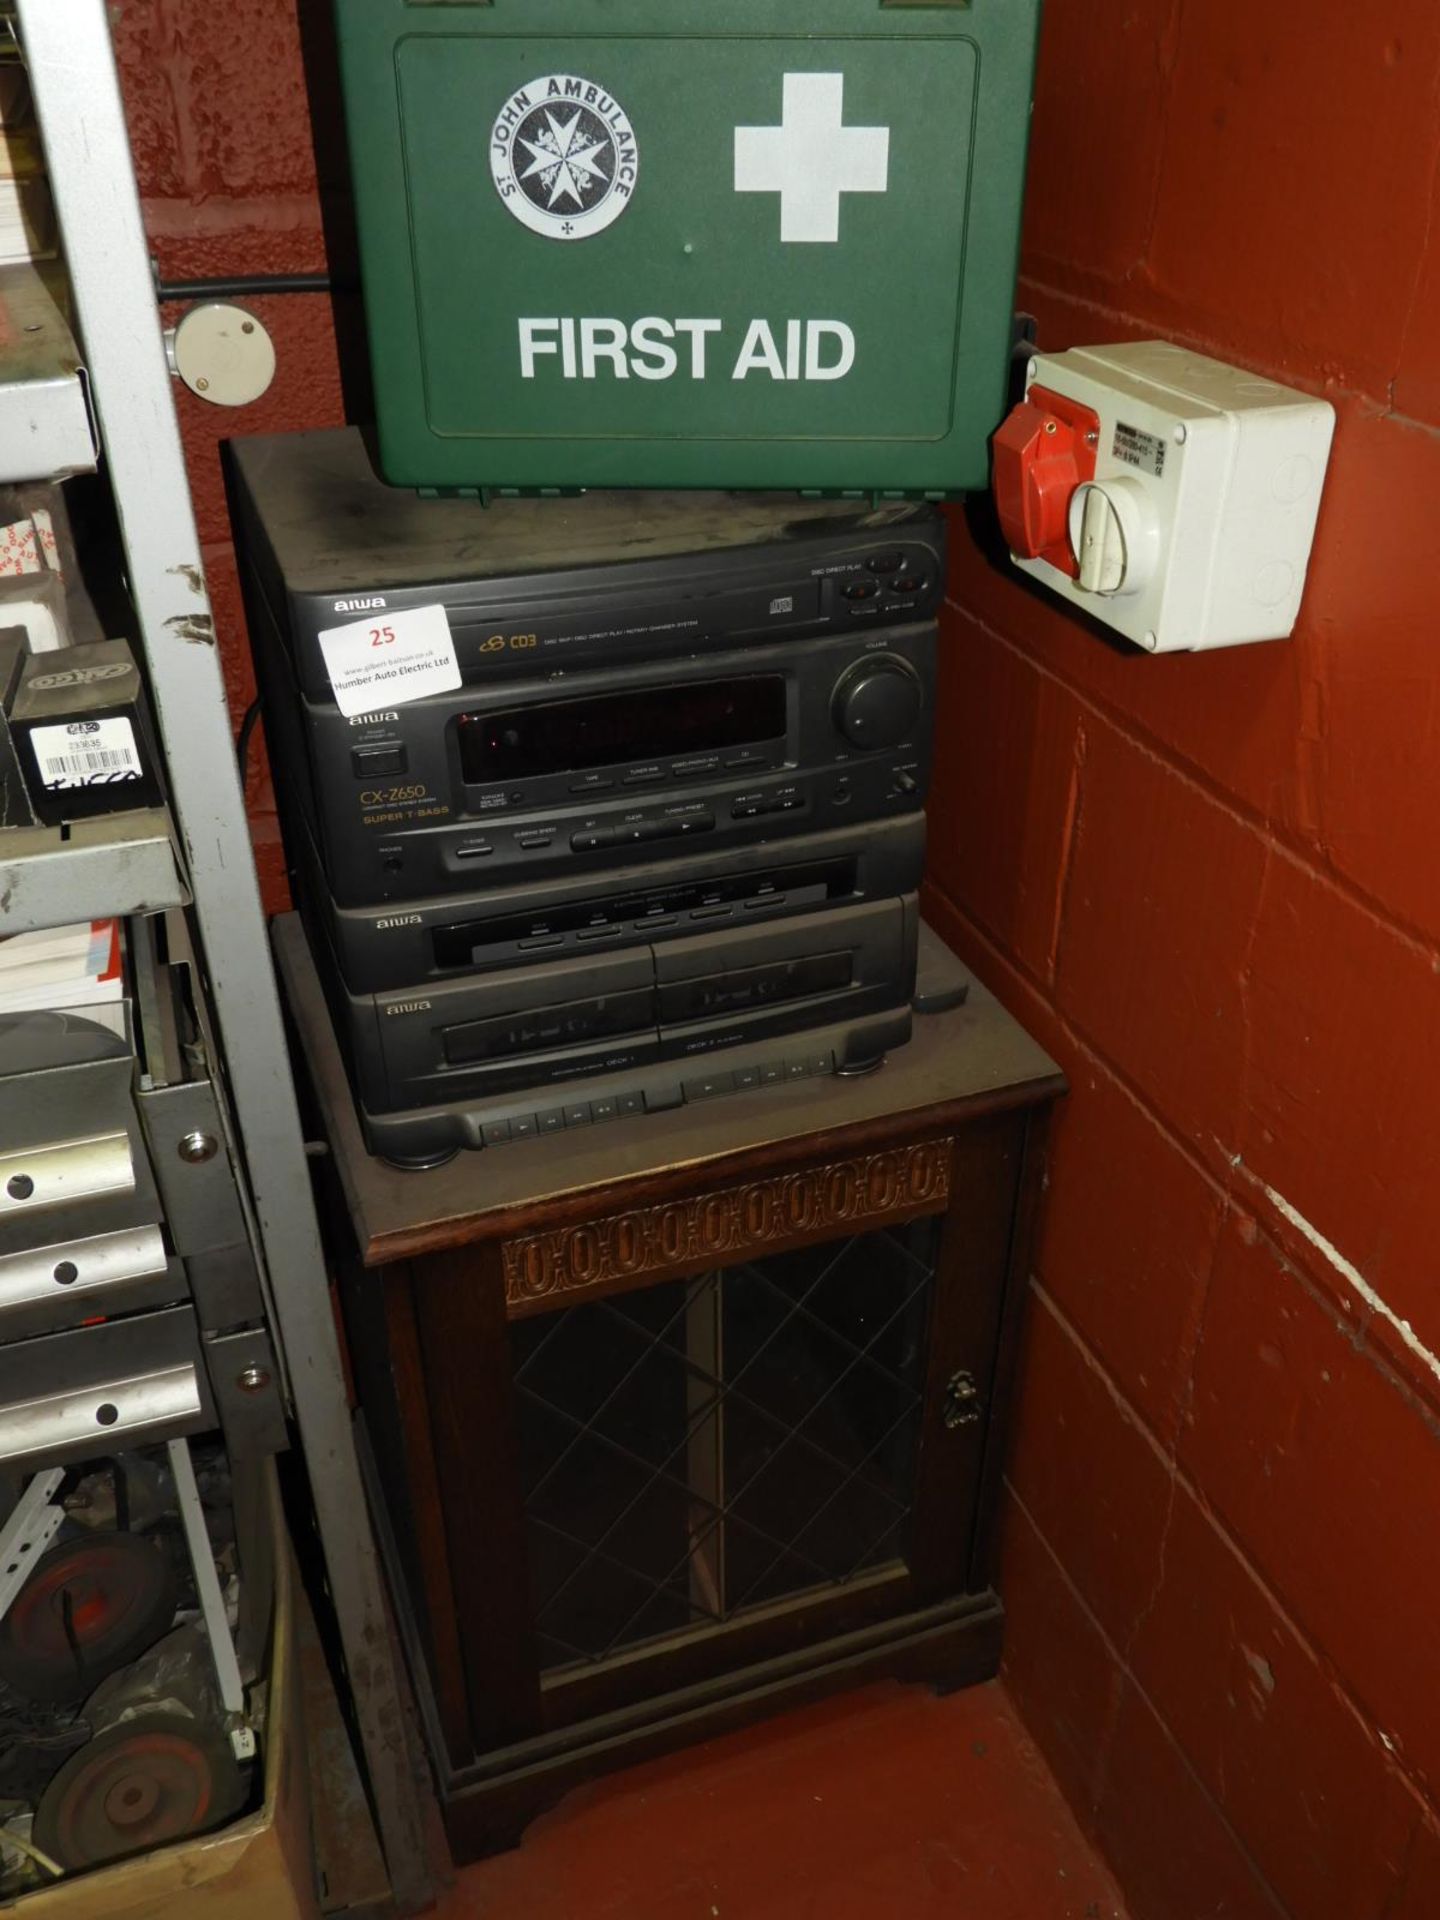 *Aiwa Music System, Dart Board and a First Aid Kit